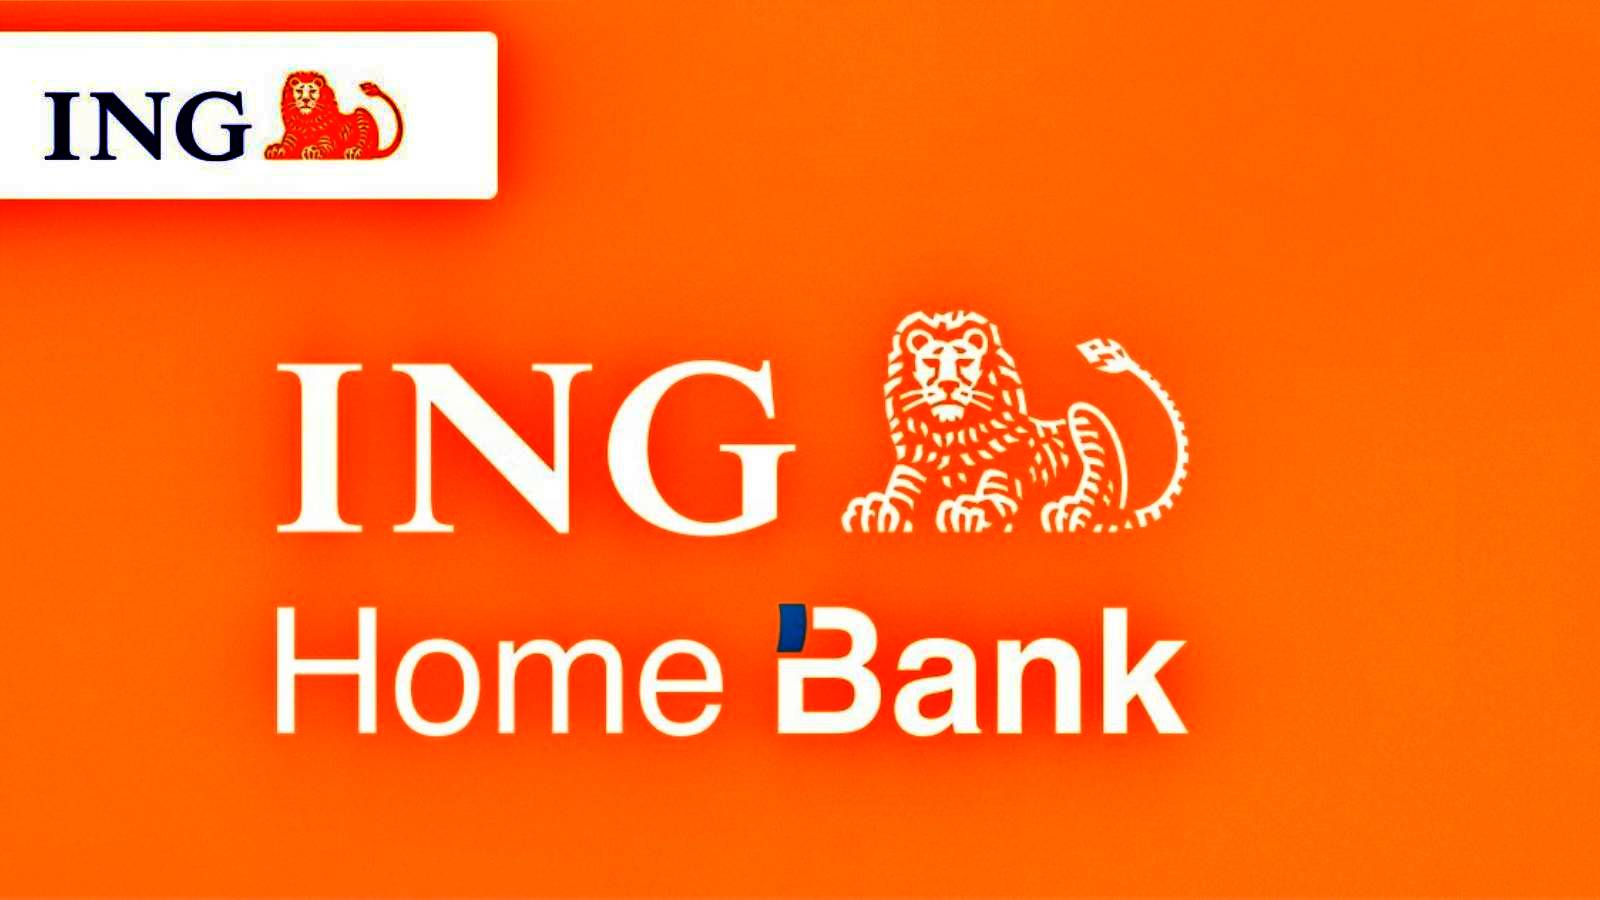 ING Bank Draws the ATTENTION of Customers View Serious Danger